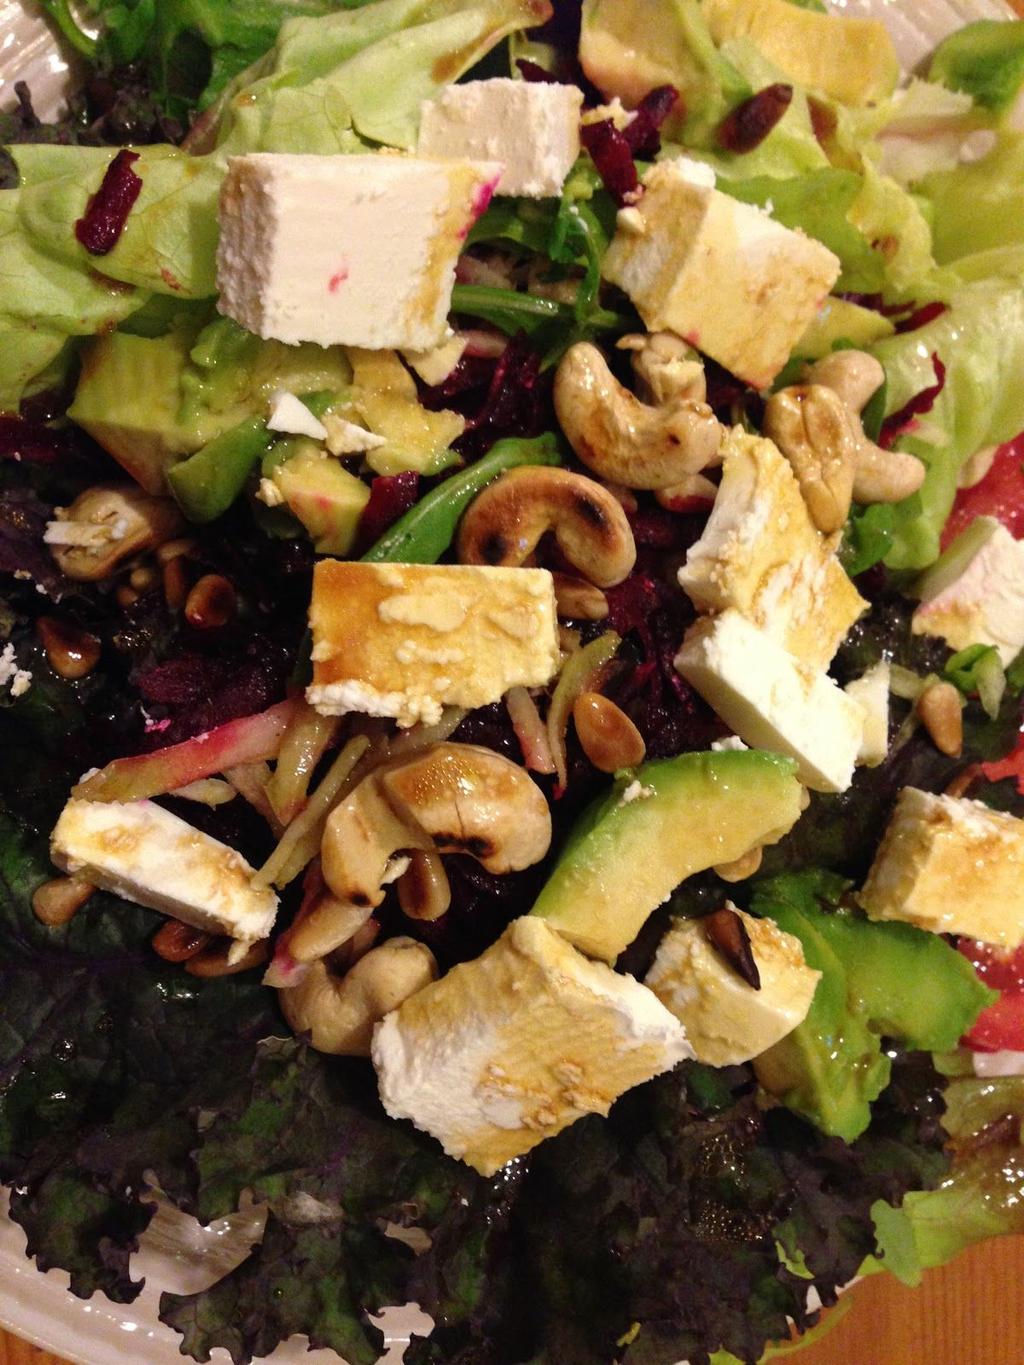 Feta, Cashew & Avocado Salad Salad 50gm feta, crumbled ¼ cup cashew nuts, slightly roasted 2 bunches salad leaves ½ avocado, cubed Balsamic Dressing 1 tablespoon balsamic vinegar ½ tablespoon olive